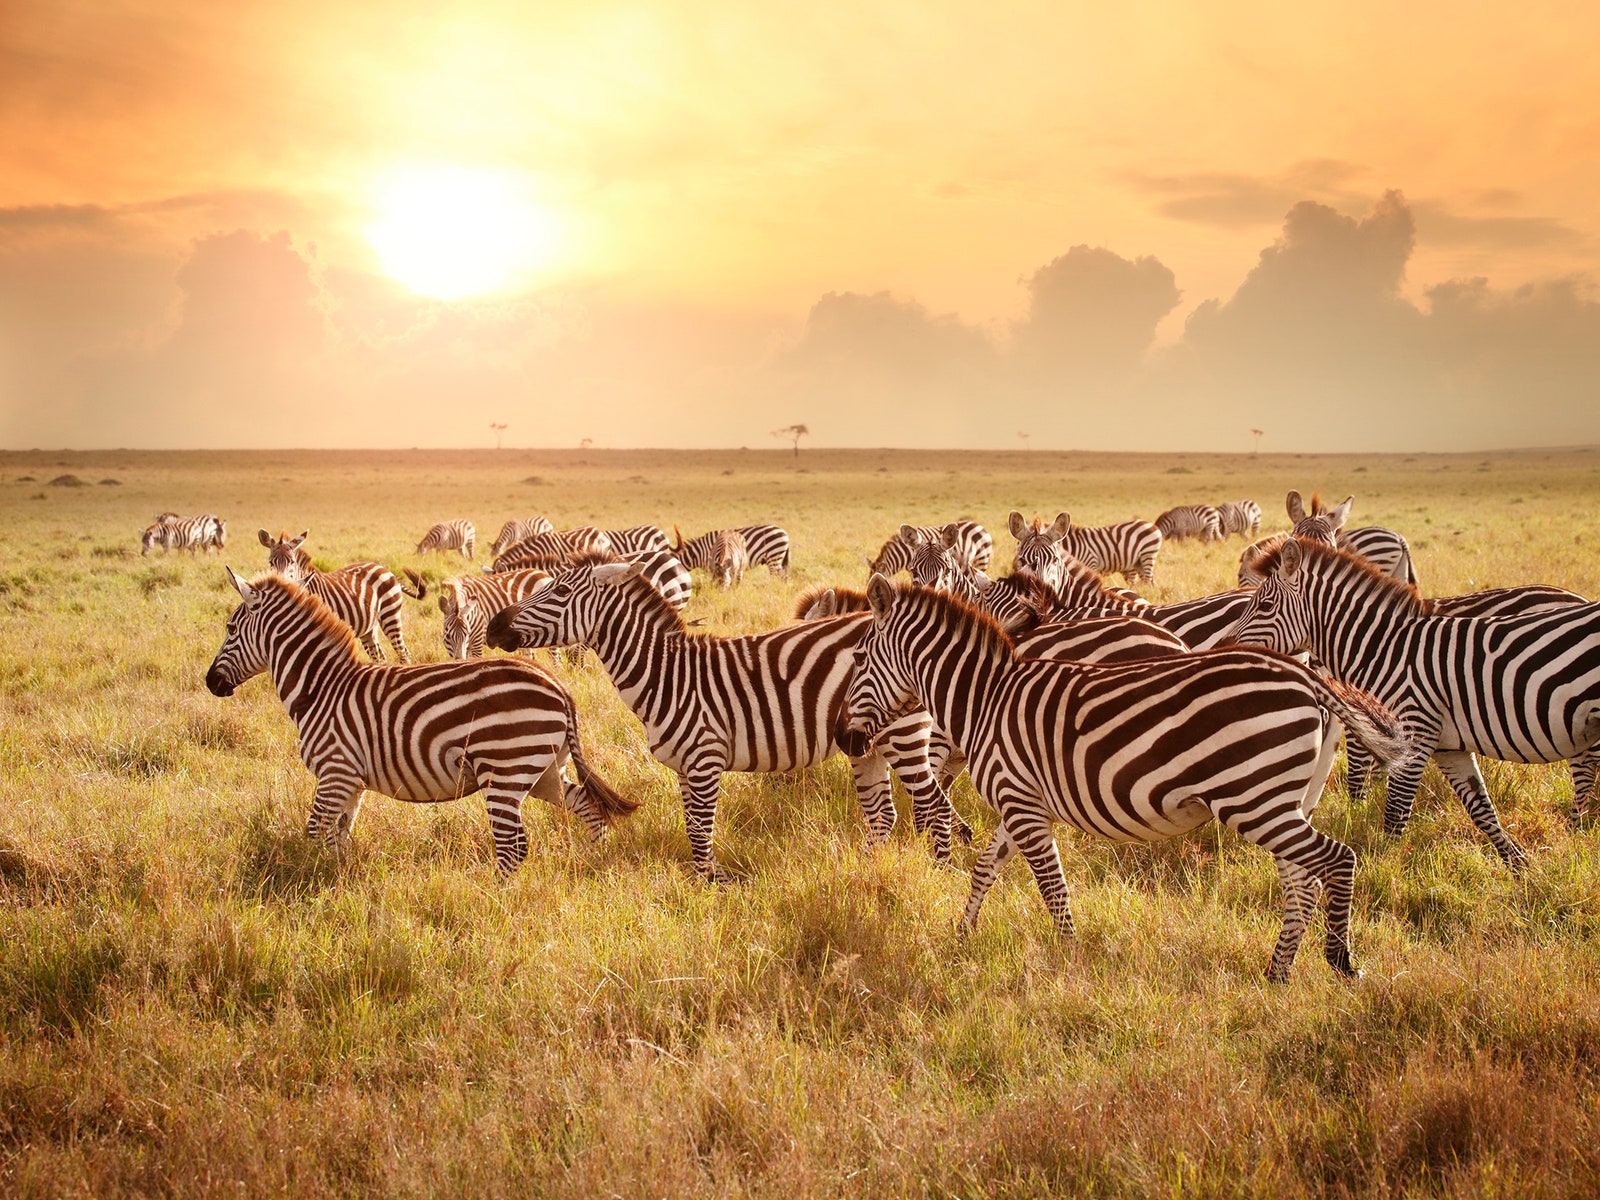 Do You Know a Little Bit About Everything When It Comes to Geography? Zebras in Kenya savanna grassland